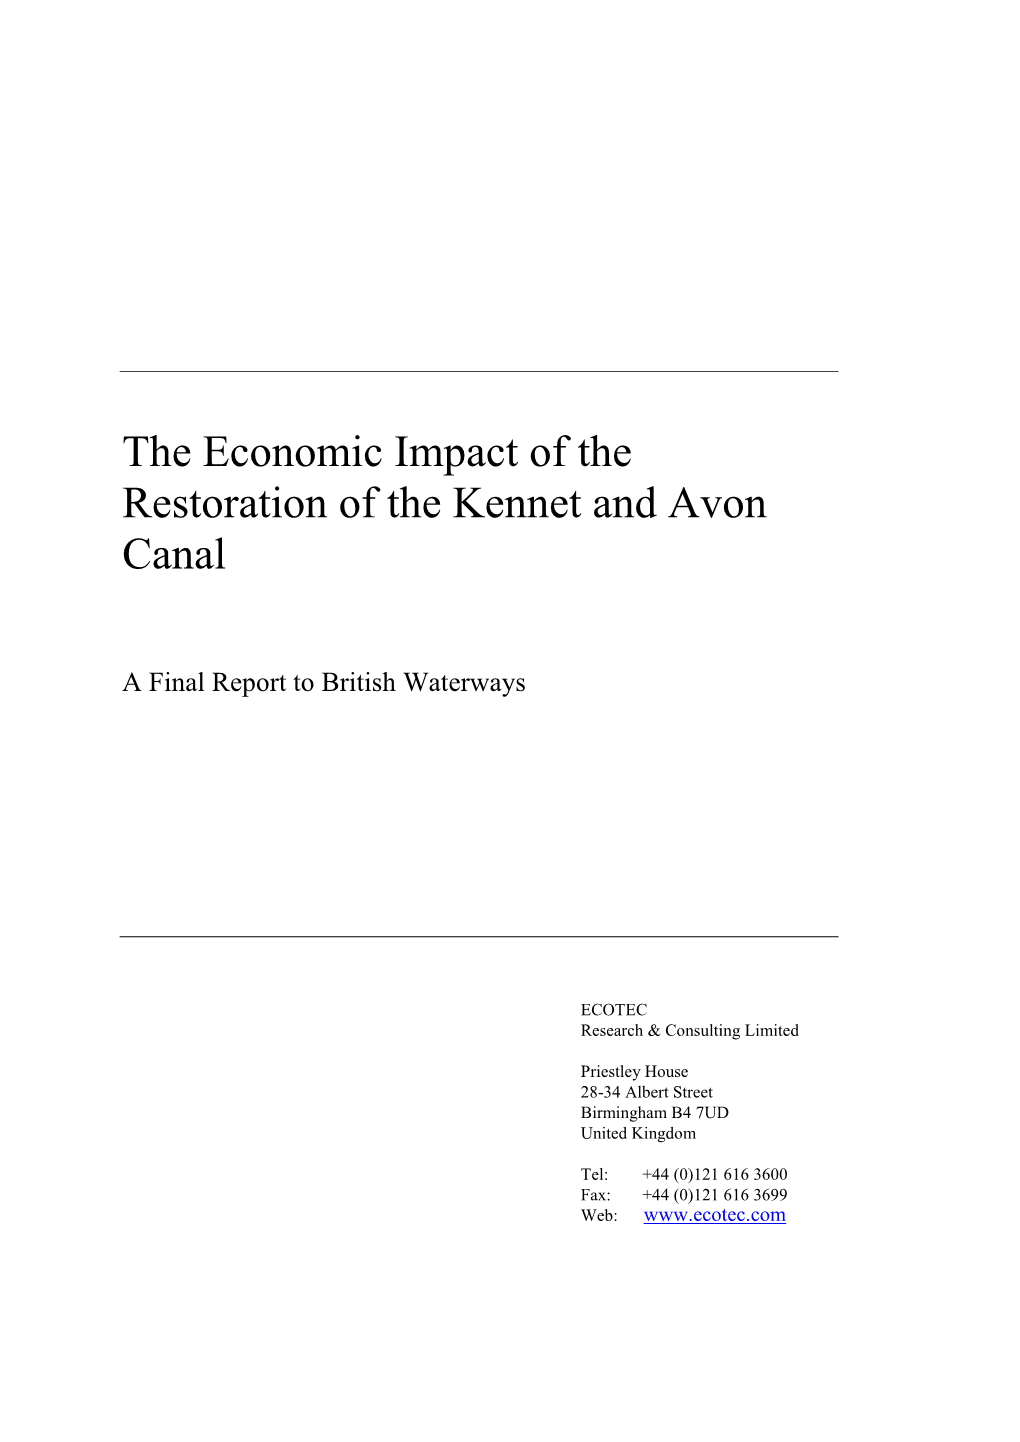 The Economic Impact of the Restoration of the Kennet and Avon Canal